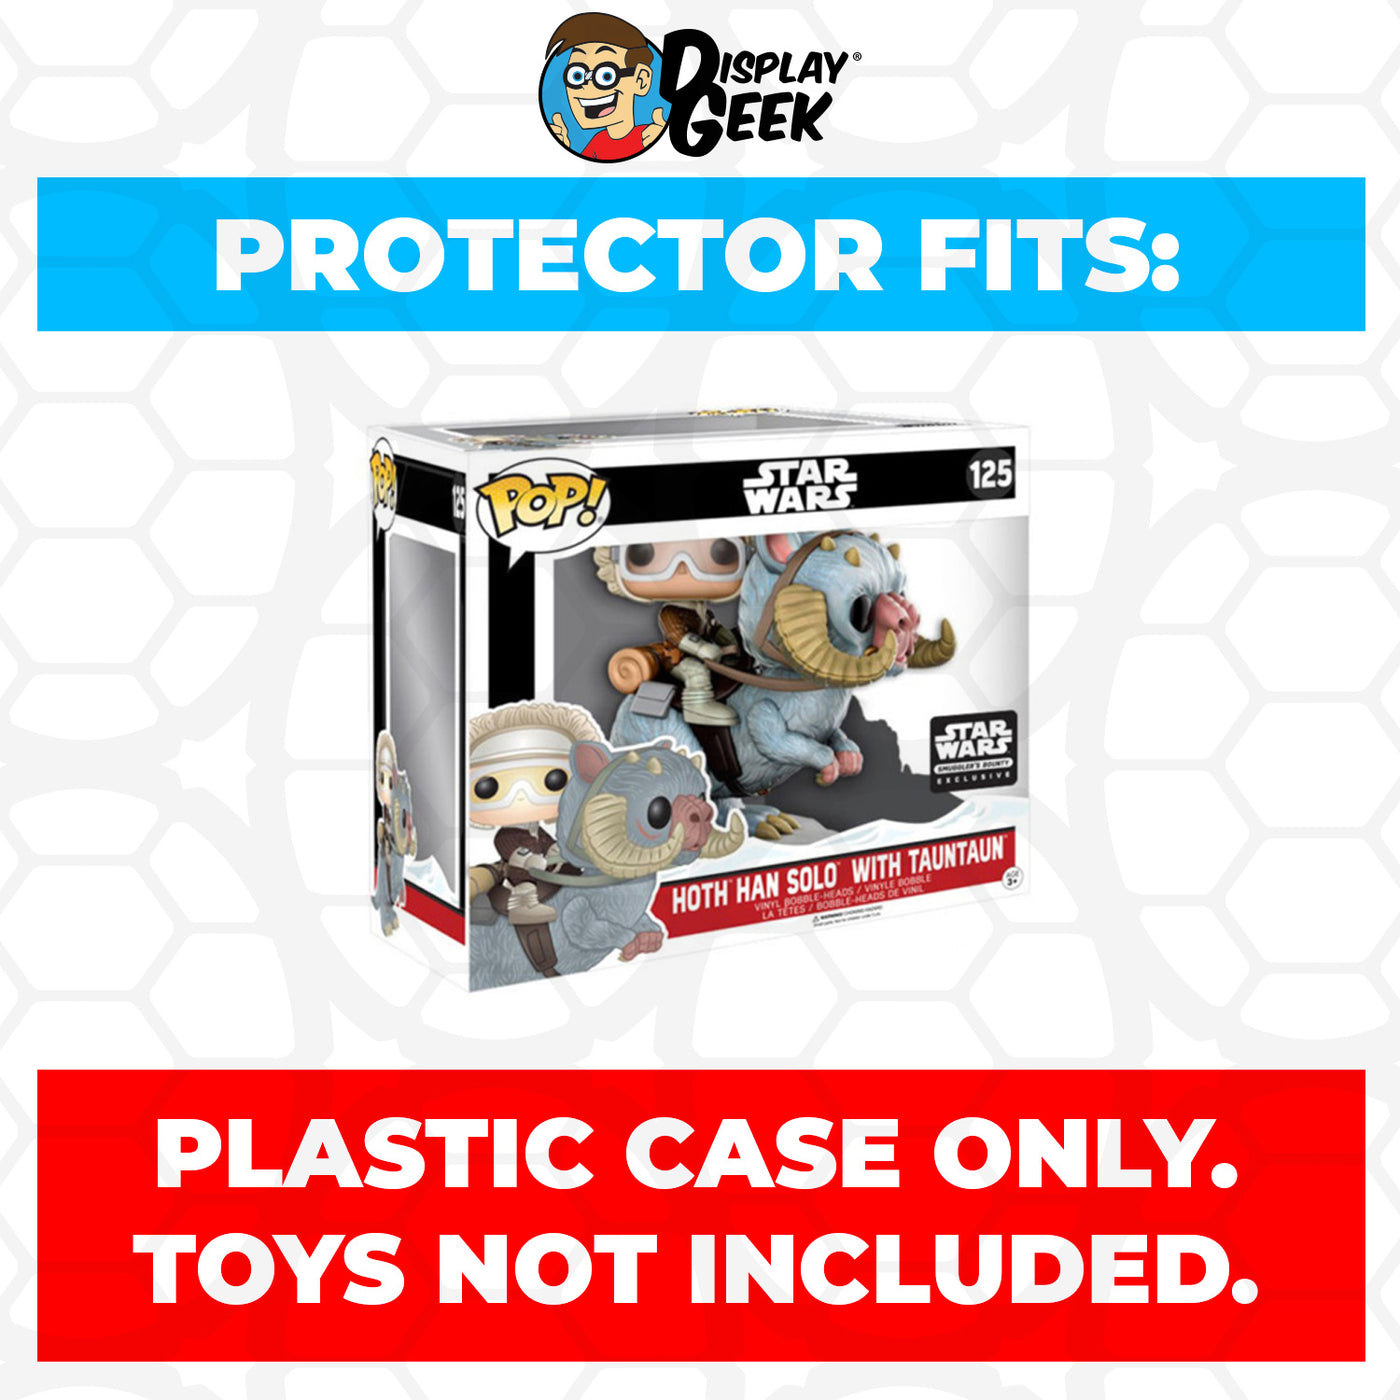 Pop Protector for Hoth Han Solo with TaunTaun #125 Funko Pop Rides on The Protector Guide App by Display Geek